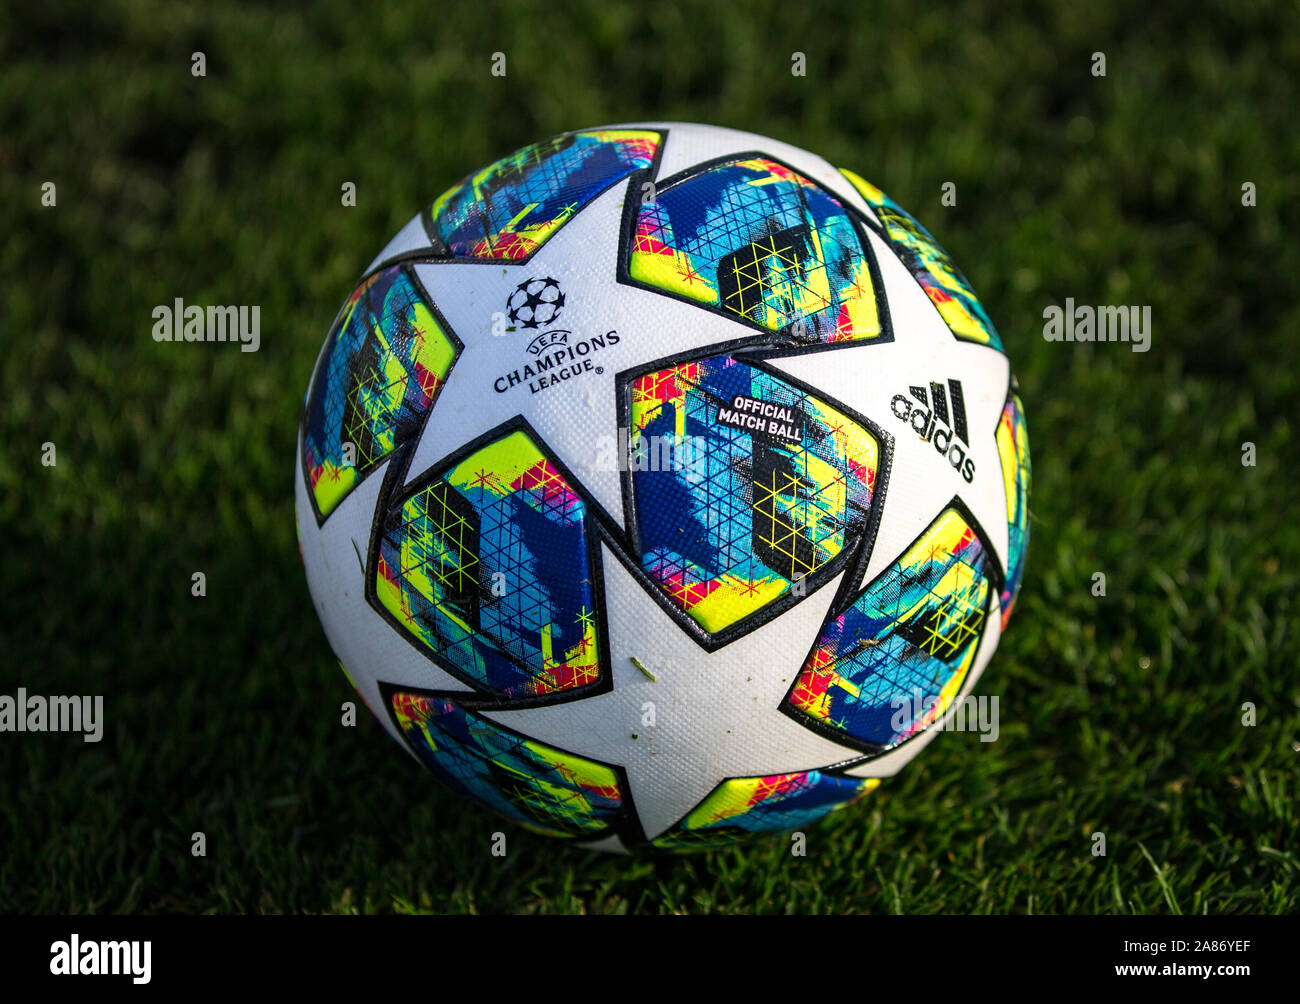 Adidas 2020 Finale Champions League Official Match Ball UEFA Youth League group match between Chelsea U19 and Ajax U19 at the Chelsea Training Ground, Cobham, England on 5 November 2019.